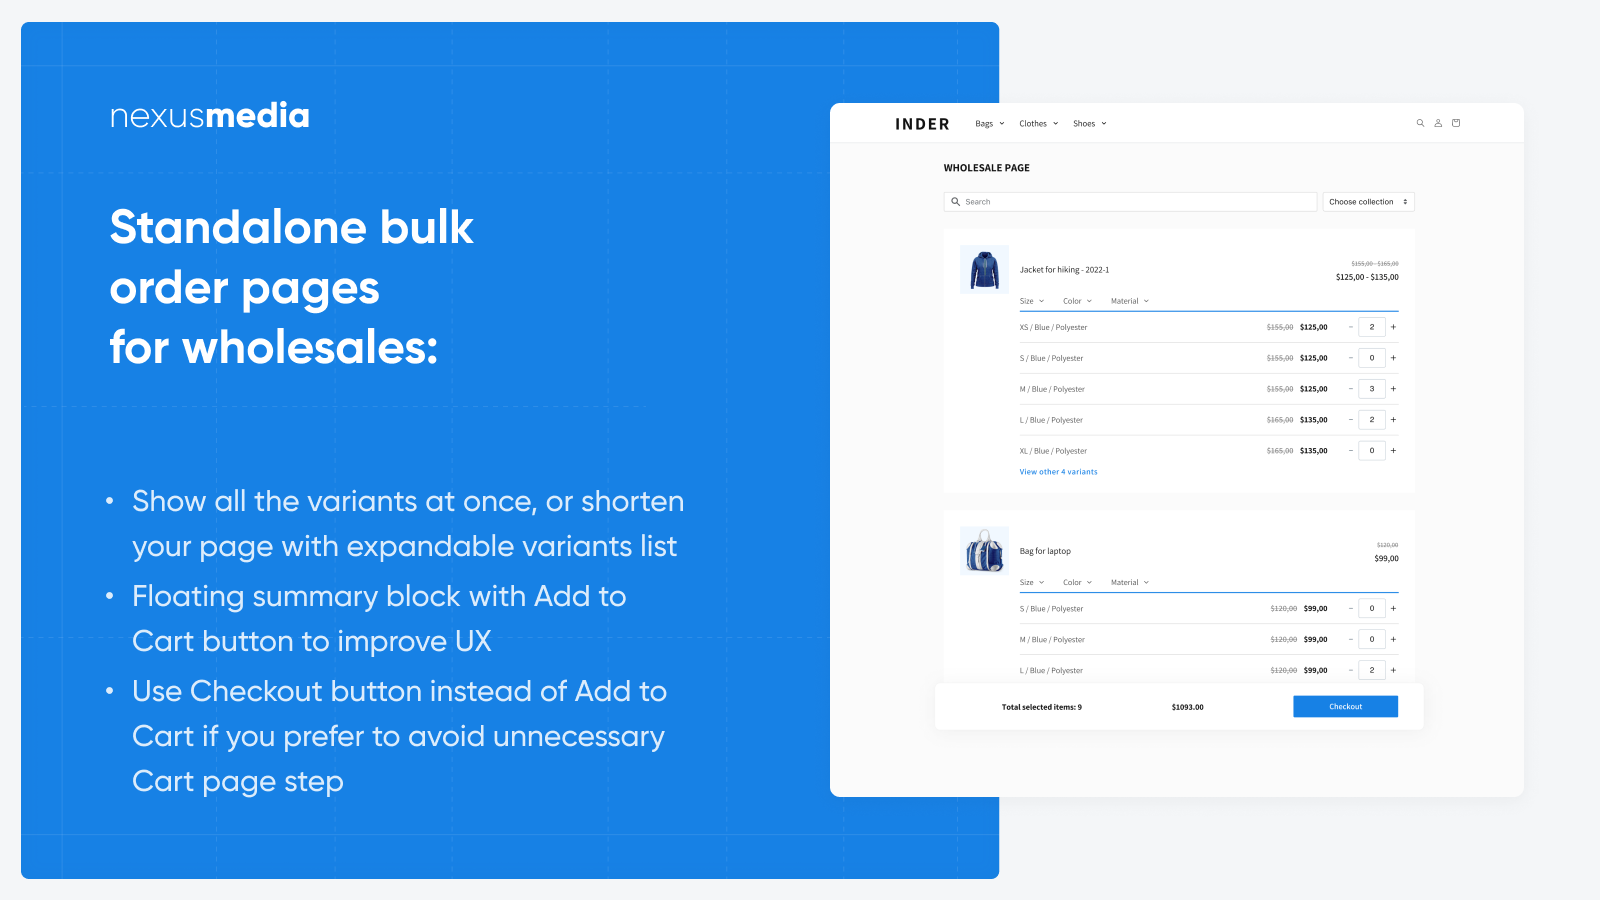 Standalone bulk order pages â€¨for wholesales: